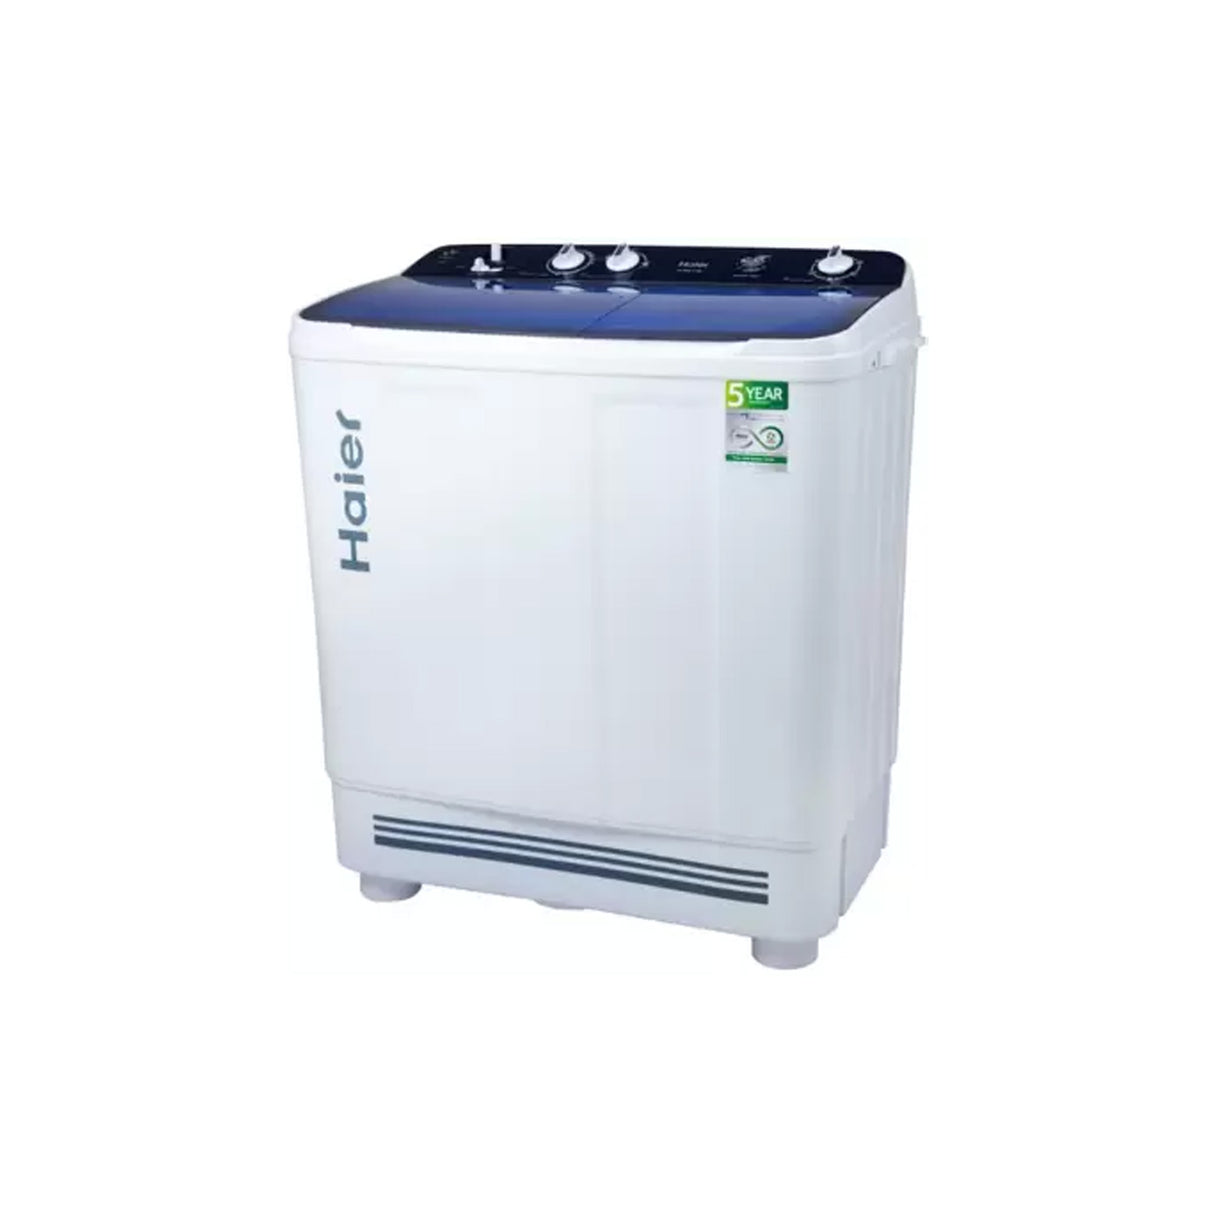 Washing Machine - Haier Top Load, 9 kg, a practical choice for effective laundry.